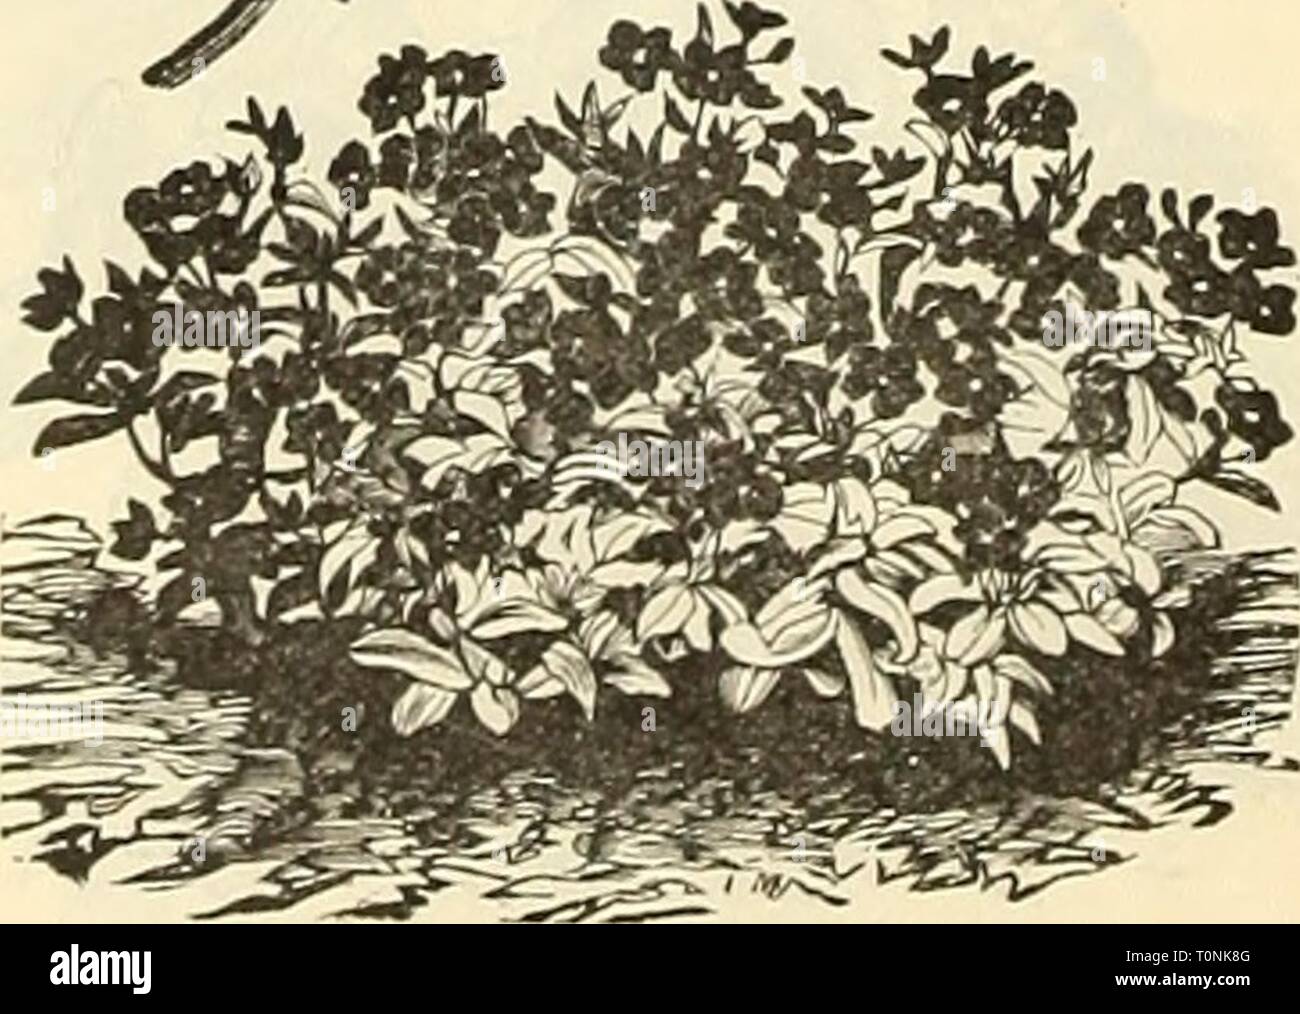 Dreer's December 1898 special wholesale Dreer's December 1898 'special' wholesale price list : select list of decorative plants  dreersdecember181898henr Year: 1898  Phi.ox Dm-.MMONDII Gbandiixoua Petunia, liybrida pure white ' Dwarf Inimitable ' ' Snowball ' striped and blotched, finest mixed ' fine mixed Phlox Drummondii, finest mixed grandiflora white chamois rose carmine, white eye yellow scarlet ' striped white blood red, with white eye . . finest mixed nana compacta, Snowball Fireball ' ' cannine ' ' Fair Maid,//'Â«/â .... ' ' mixed double scarlet ' white ' yellow Starof Qucdlinburg (^/f Stock Photo